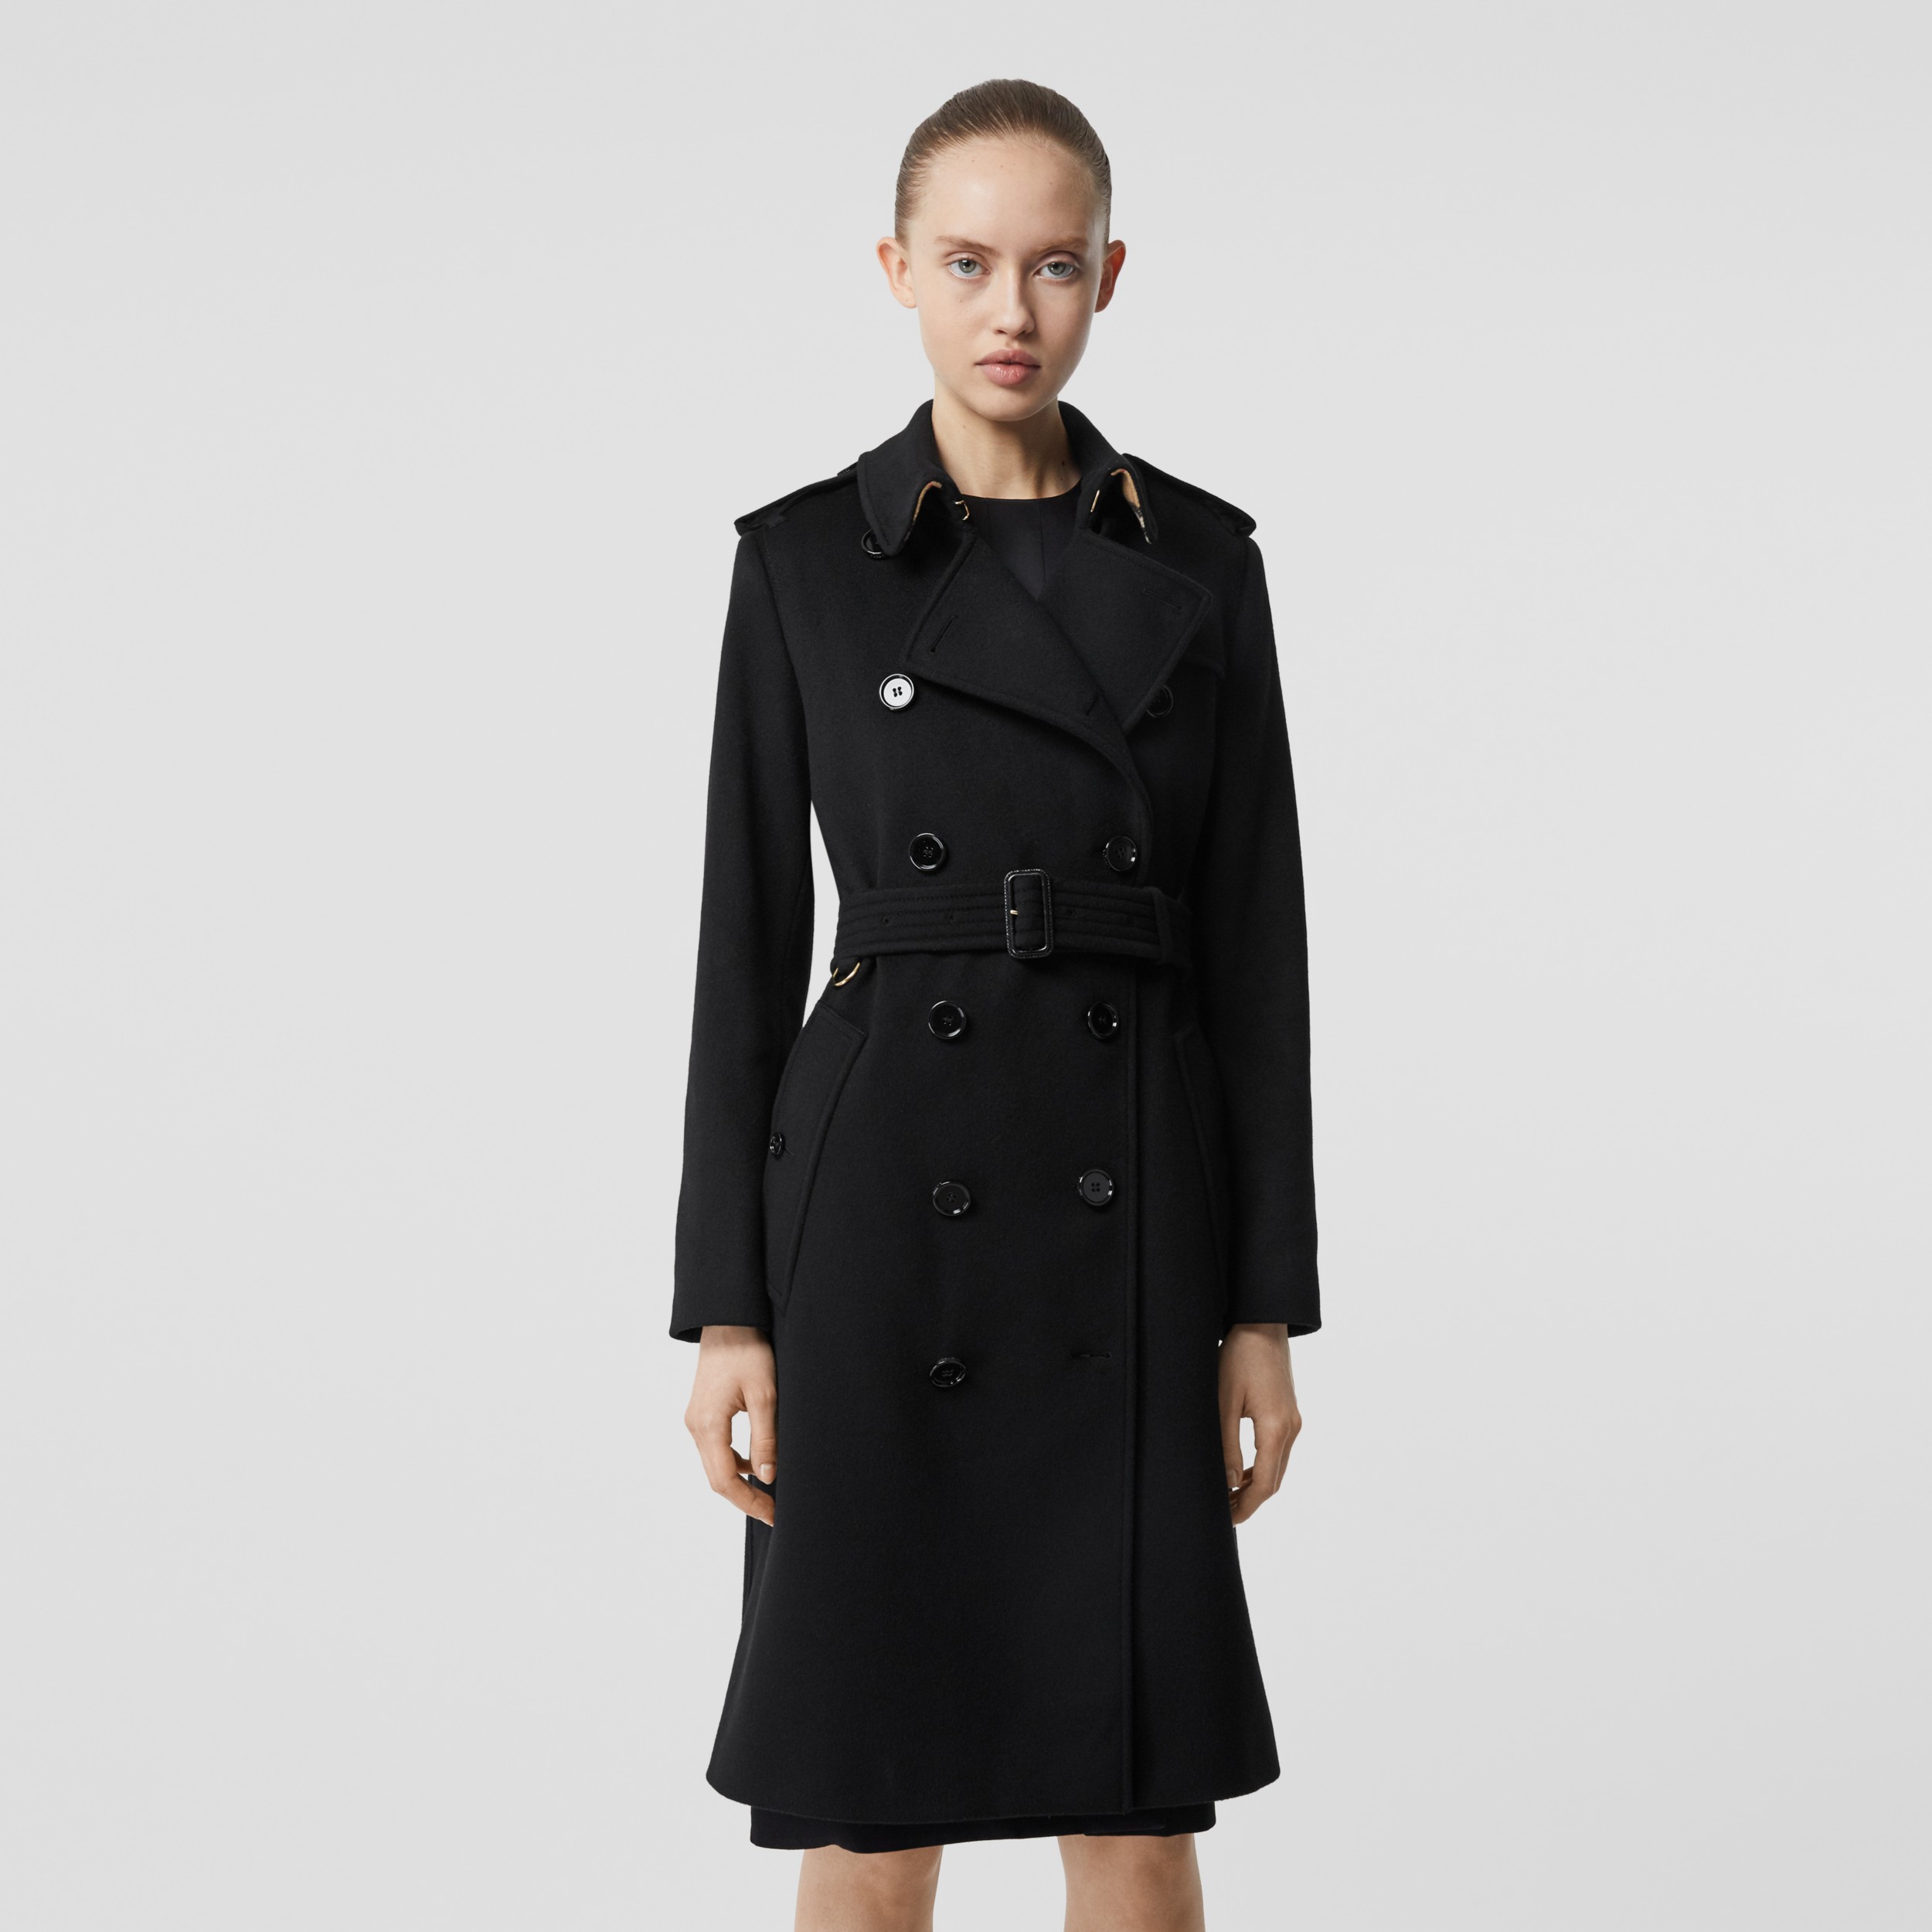 Regenerated Cashmere Trench Coat in Black - Women | Burberry United States